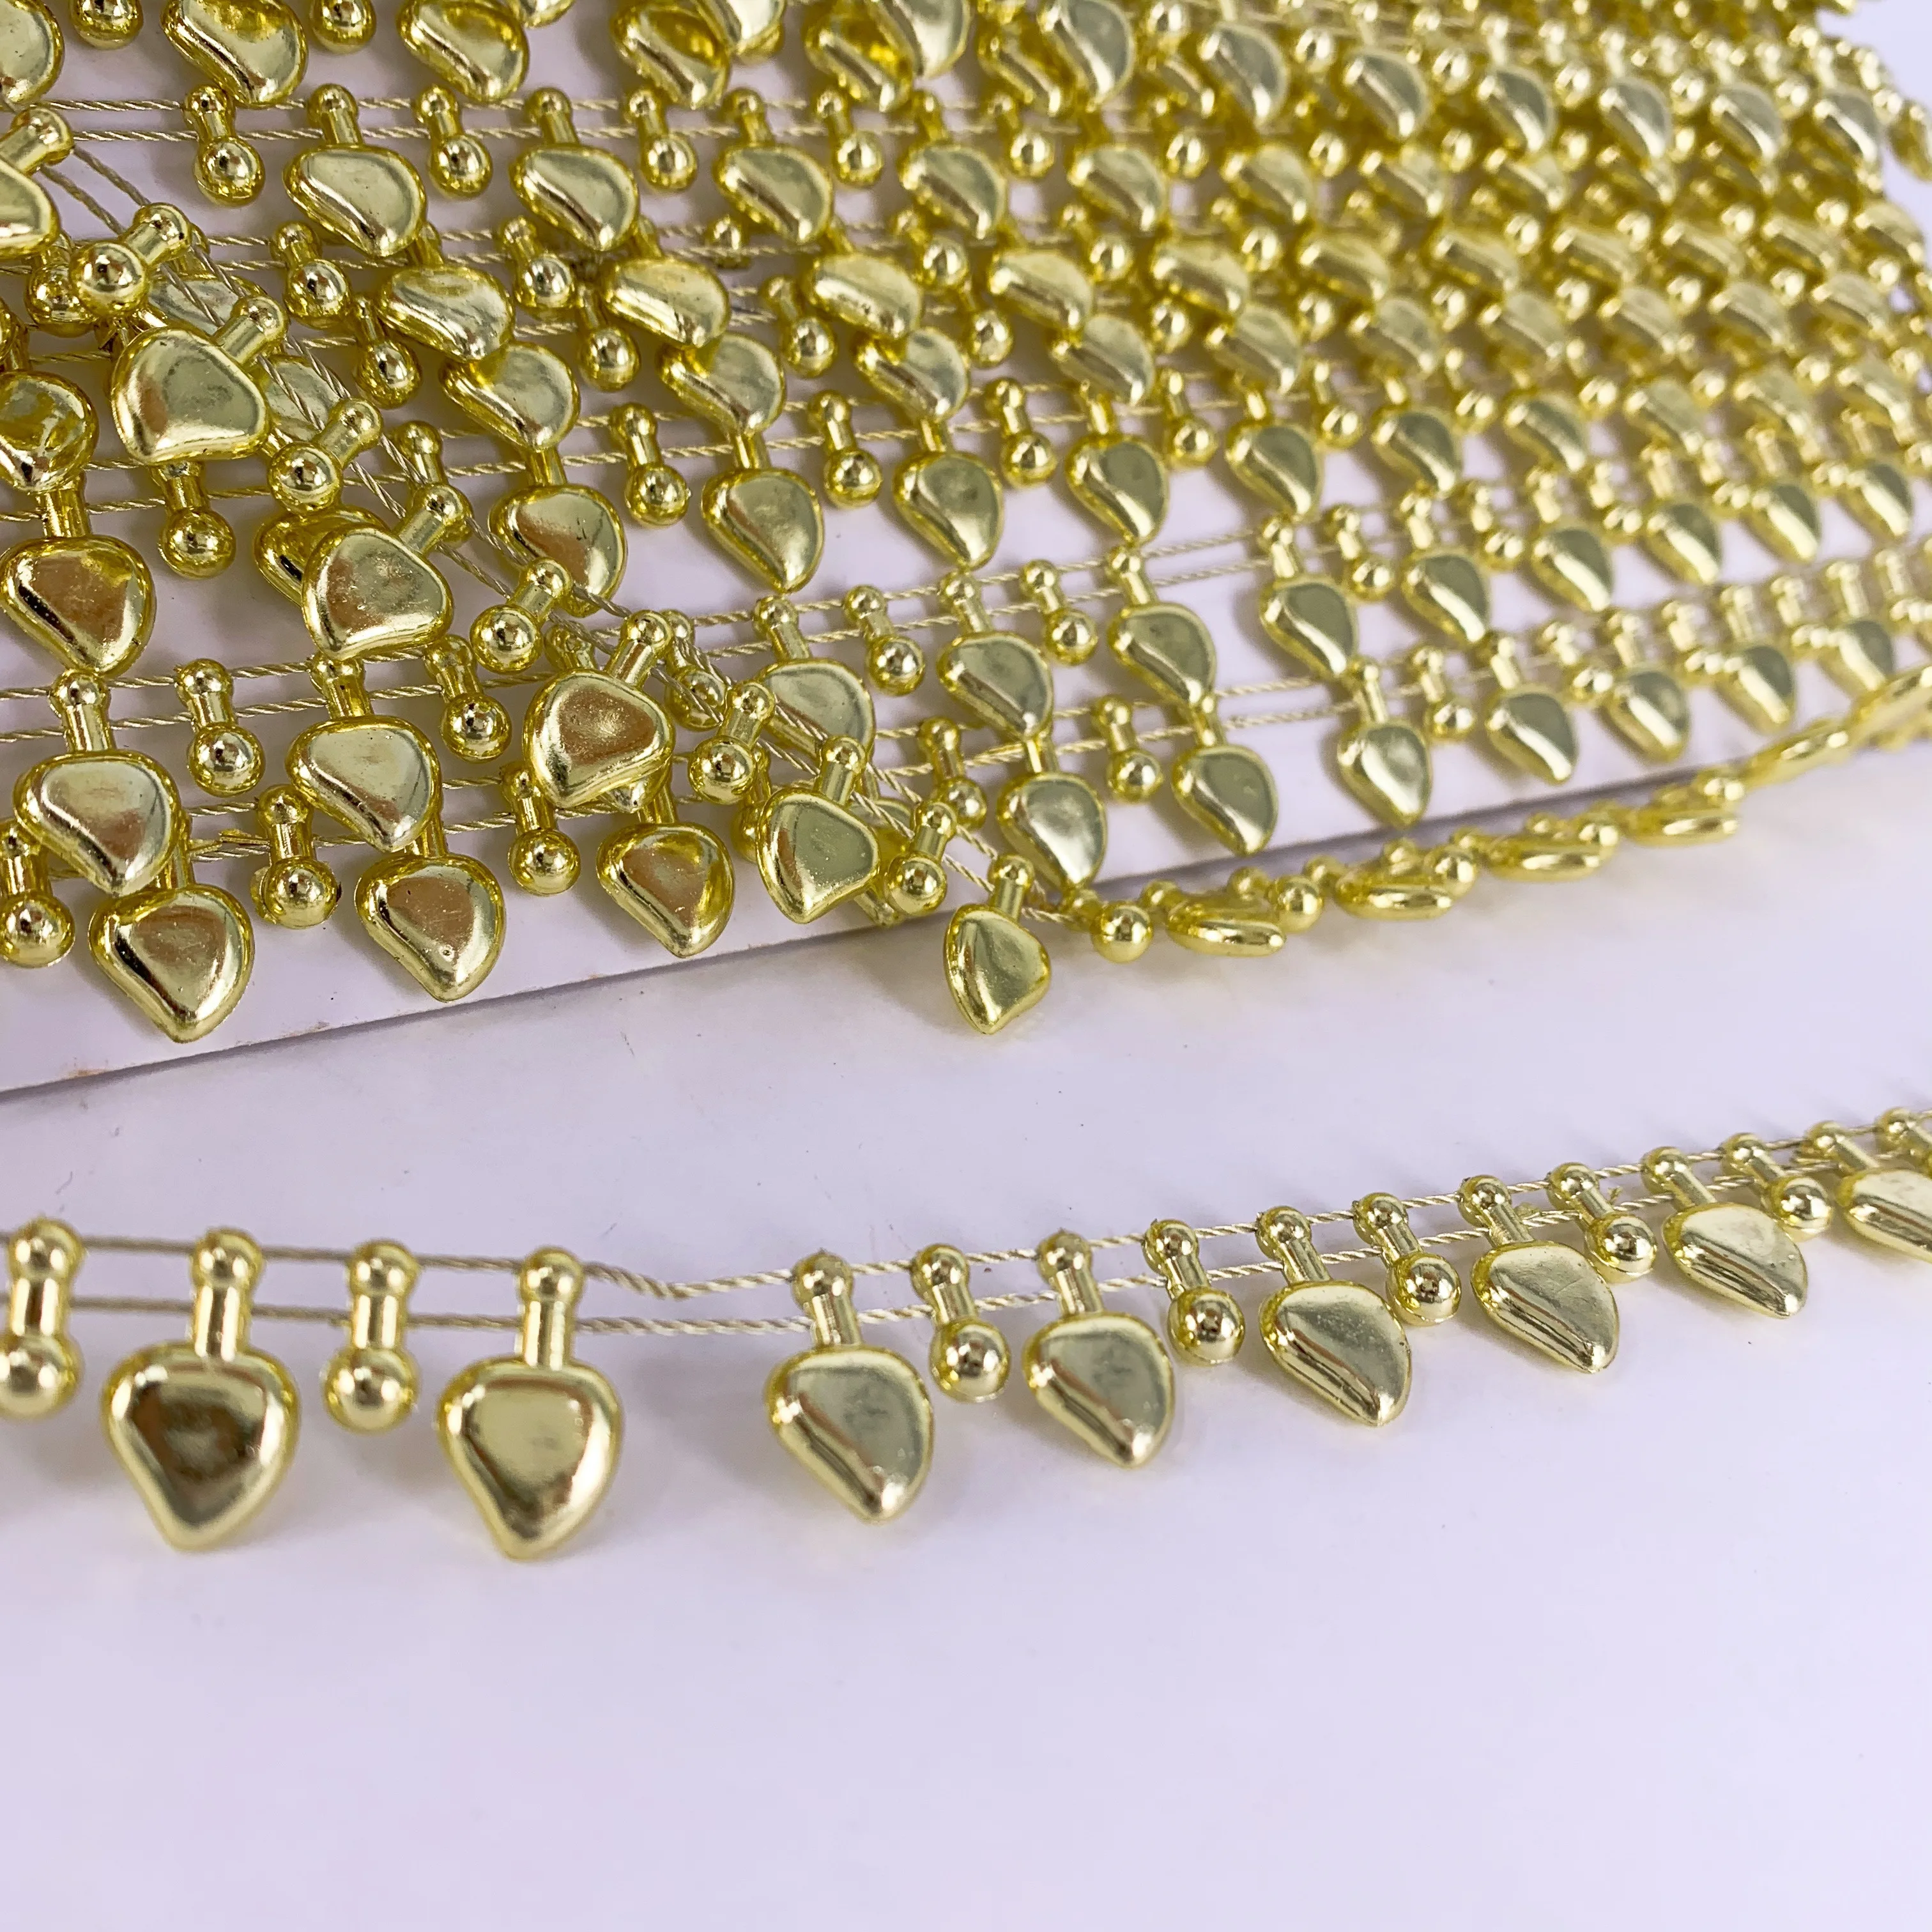 Hot sale Heart Shaped Beads rolls Chain String plastic beads for clothing Wedding Party Decorations